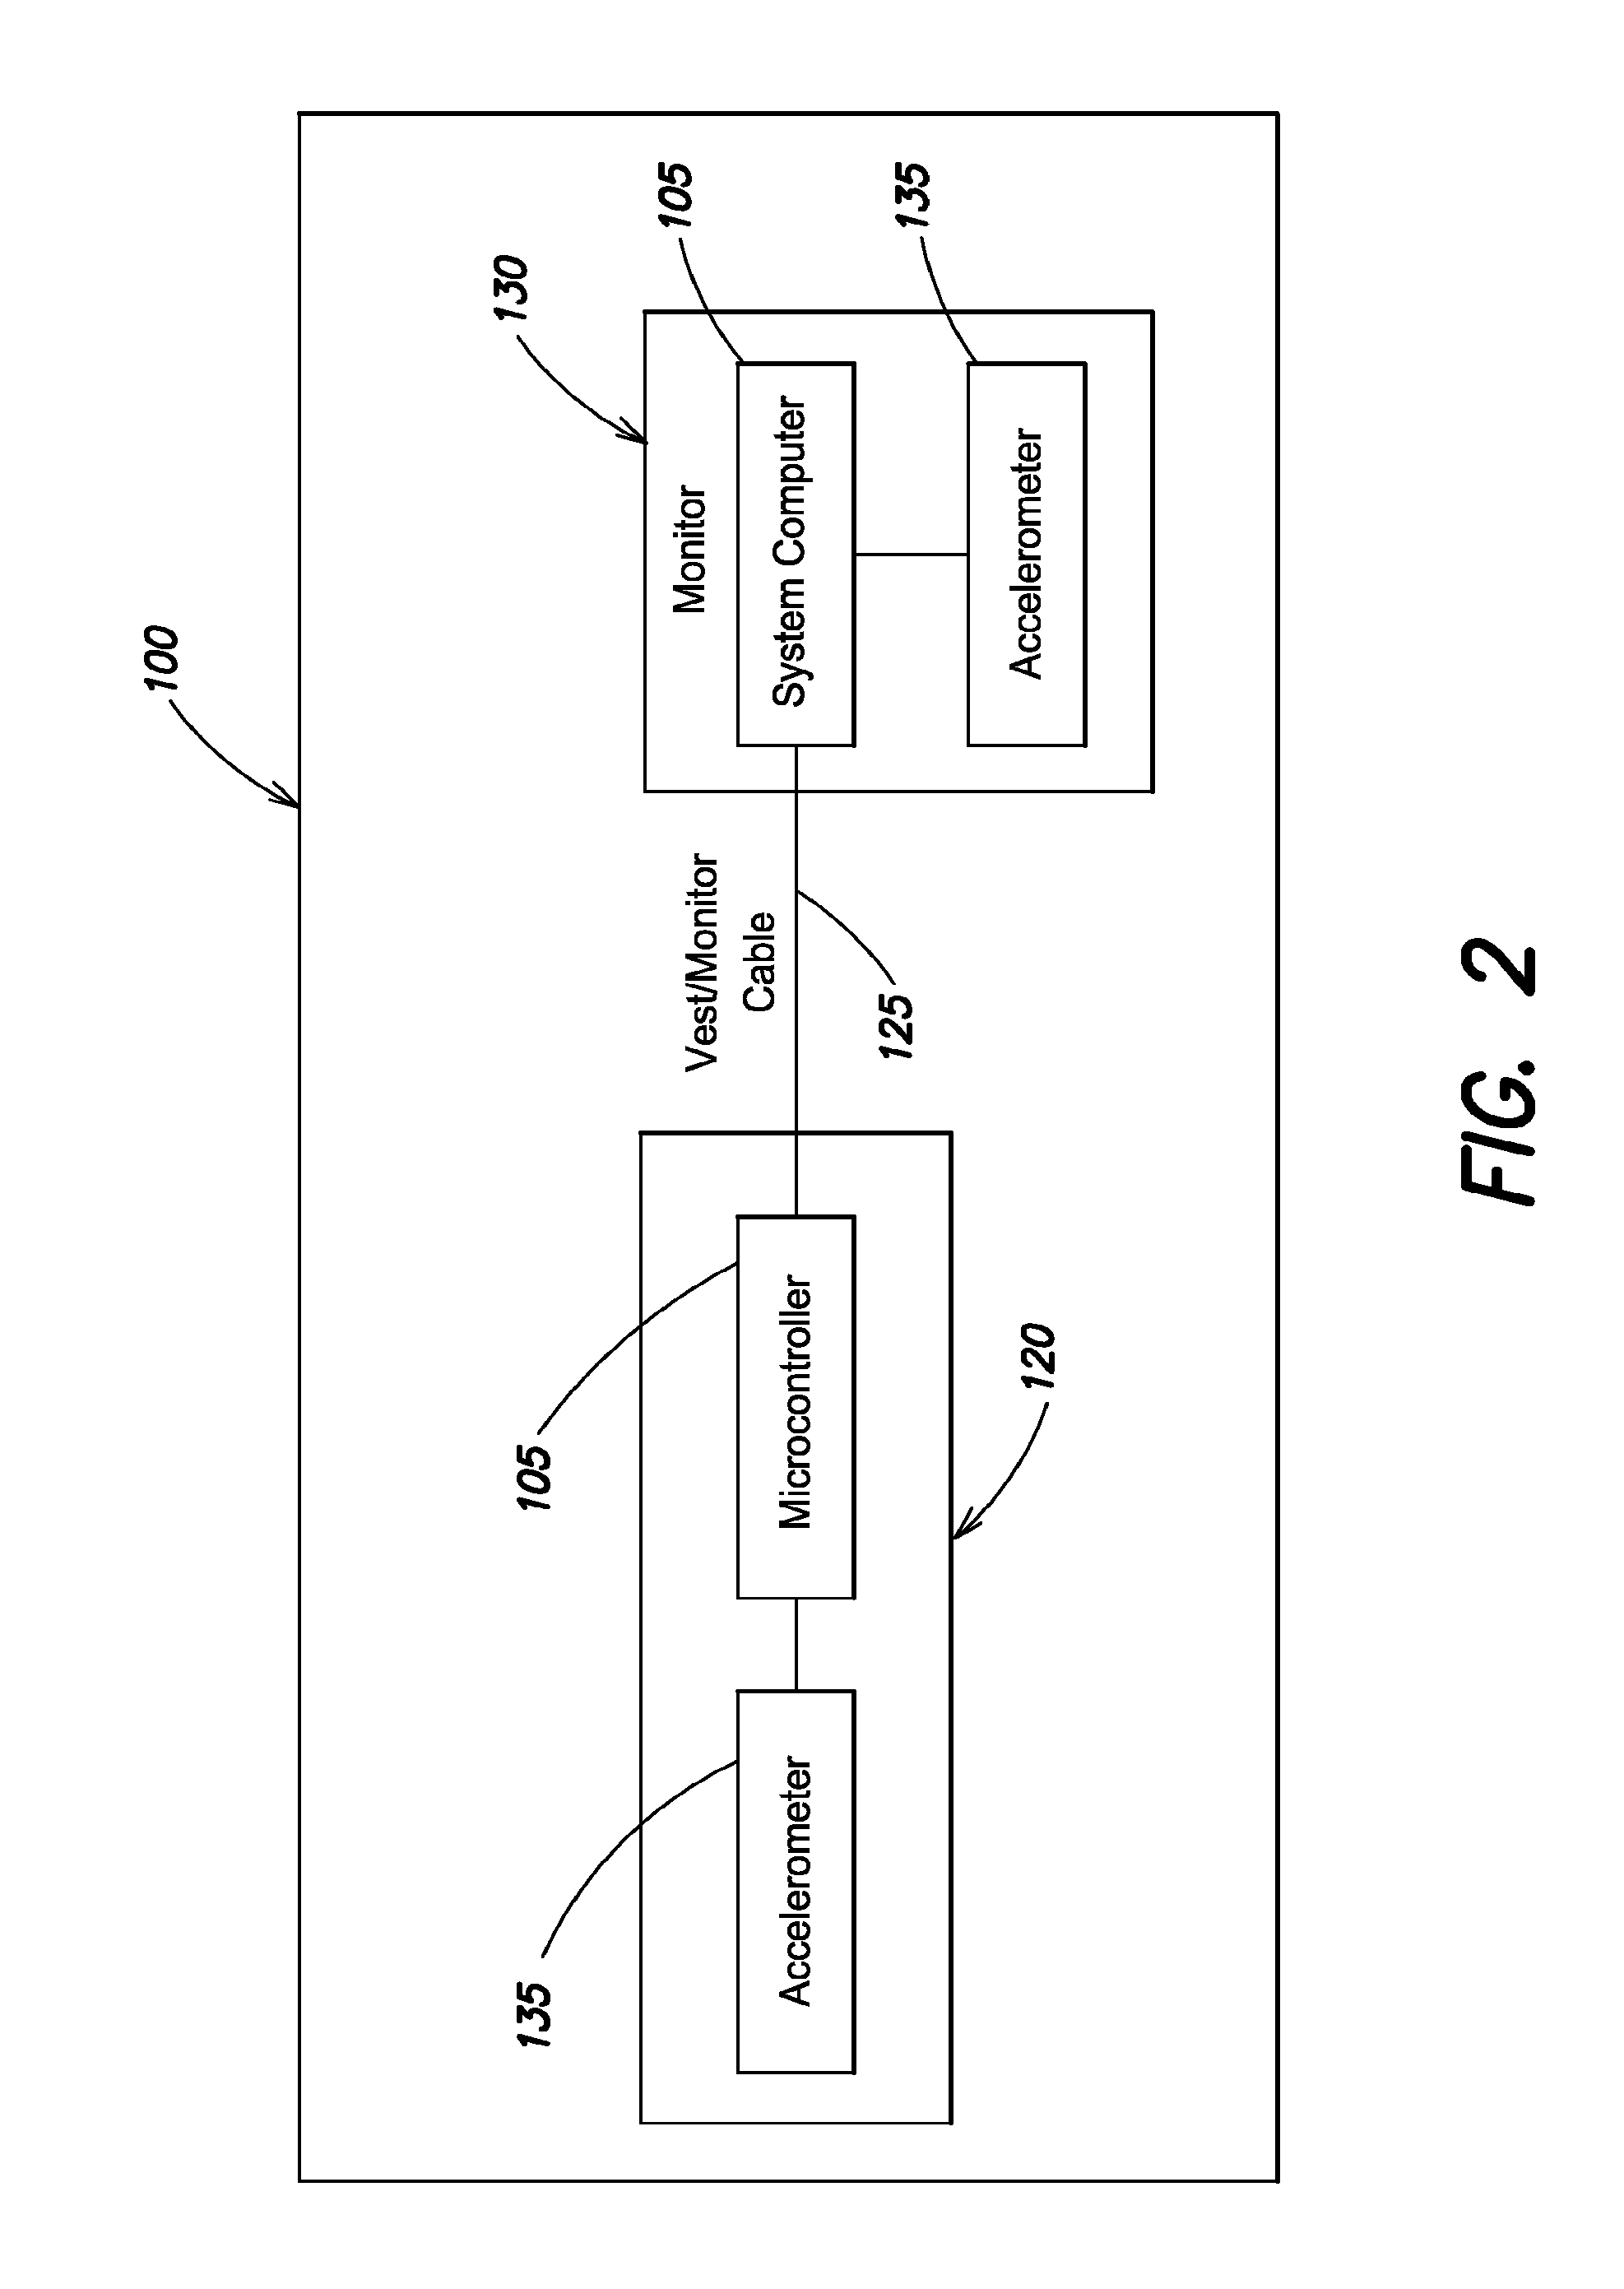 Systems and methods for configuring a wearable medical monitoring and/or treatment device